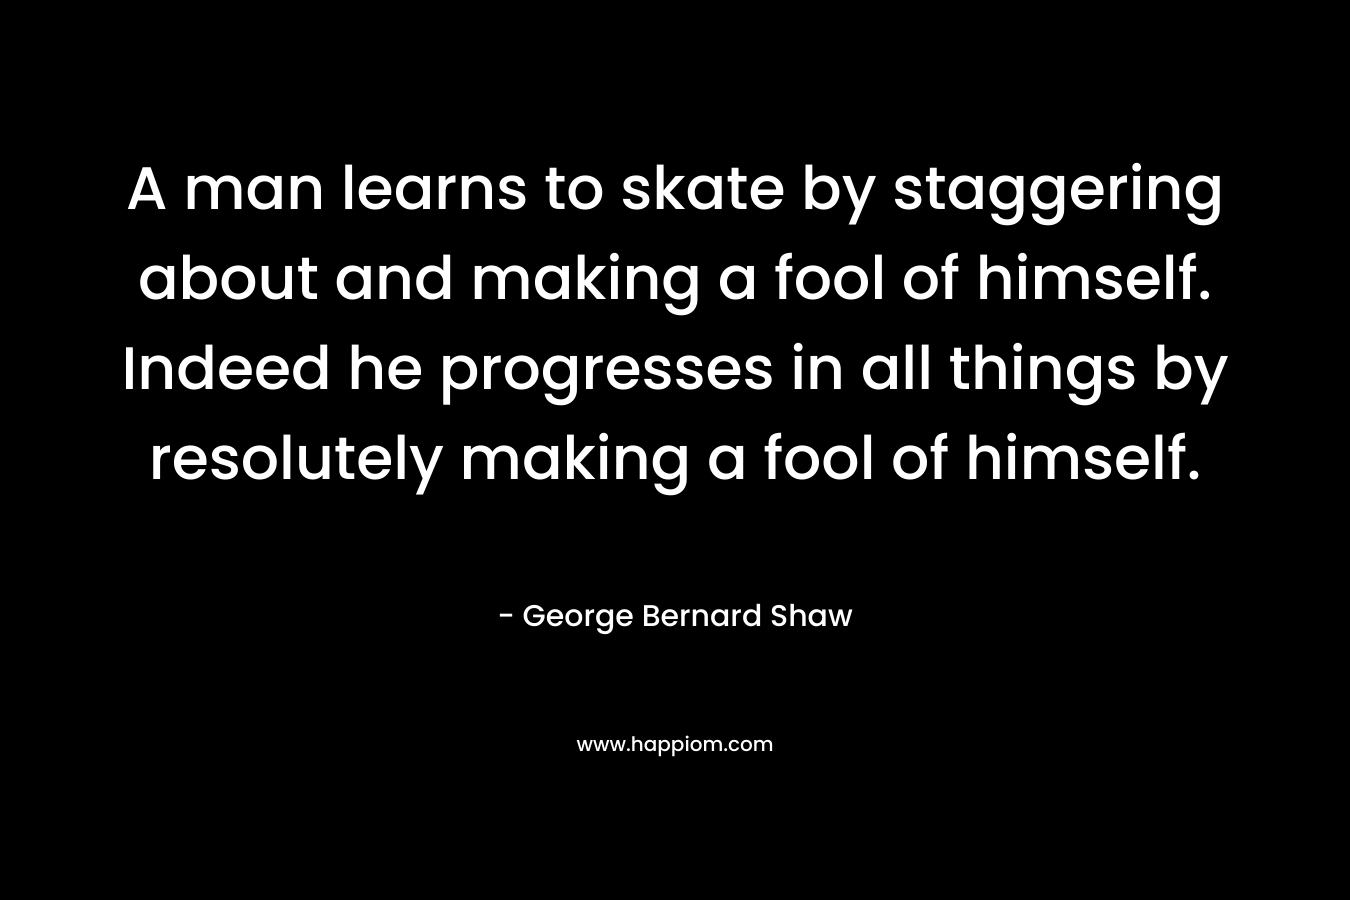 A man learns to skate by staggering about and making a fool of himself. Indeed he progresses in all things by resolutely making a fool of himself. – George Bernard Shaw